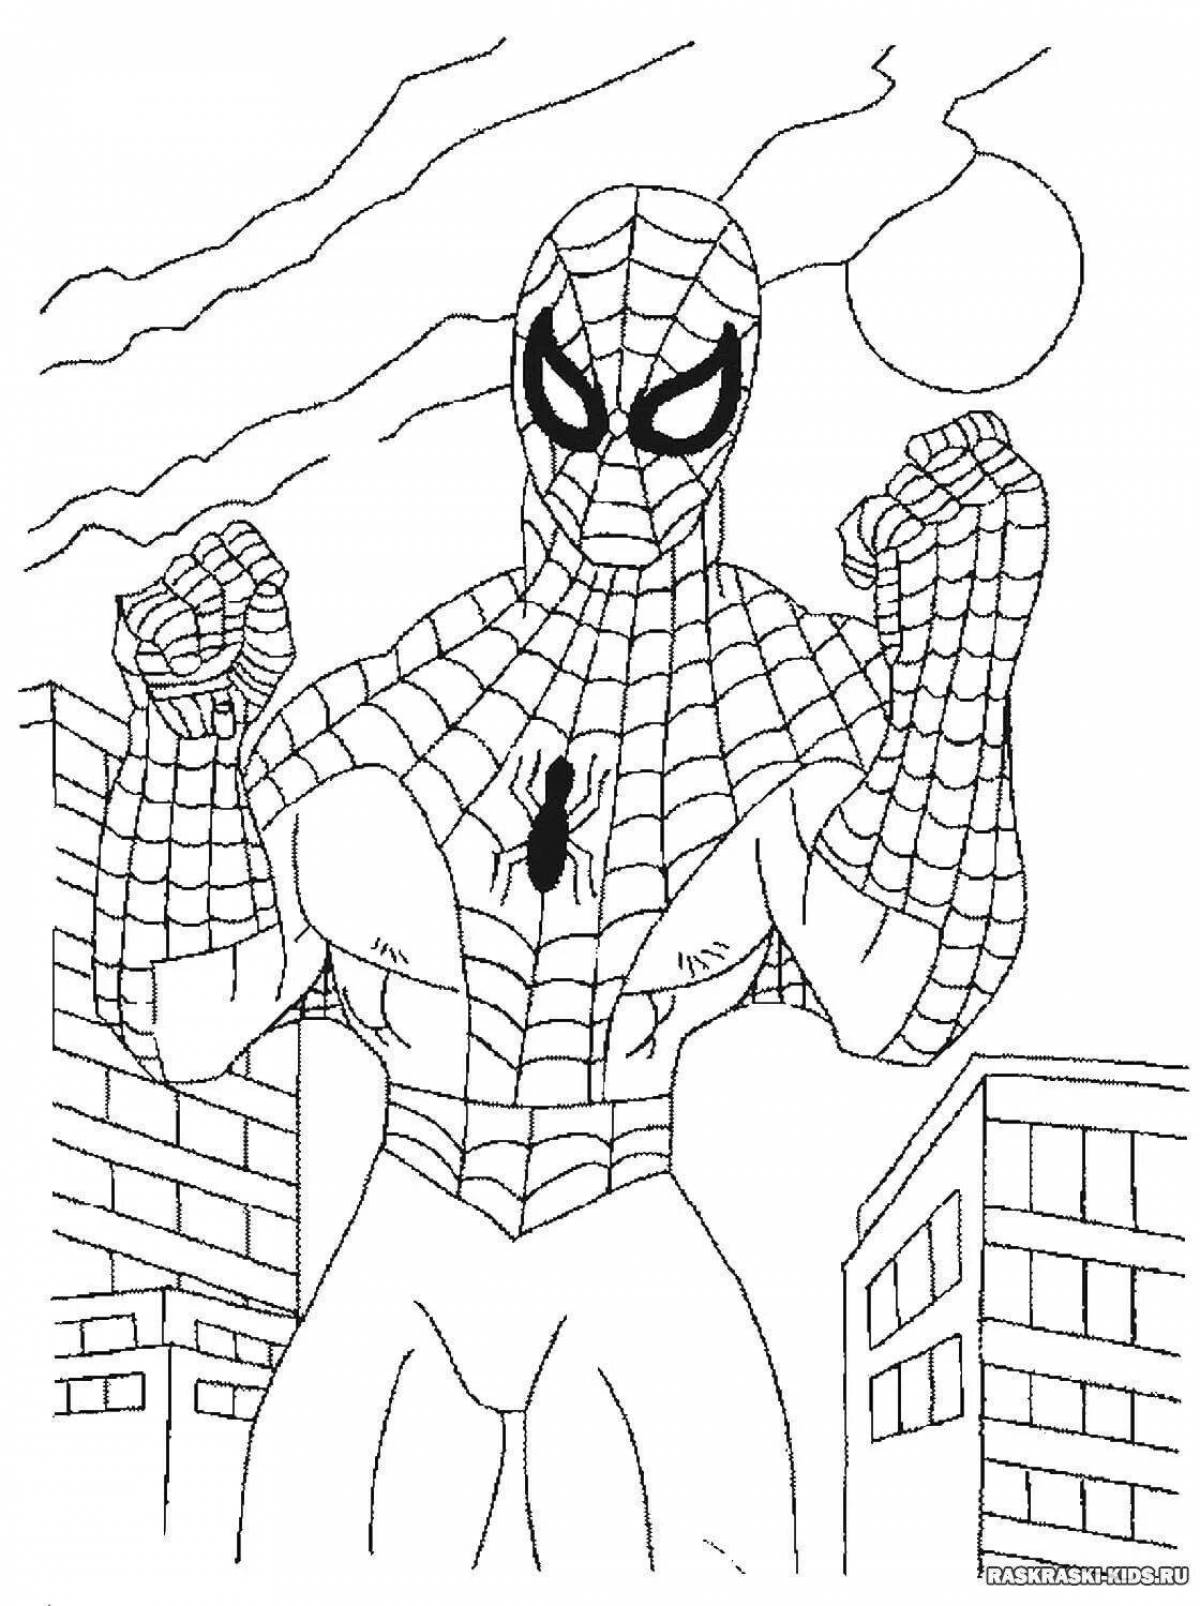 Colorful spiderman coloring page for toddlers